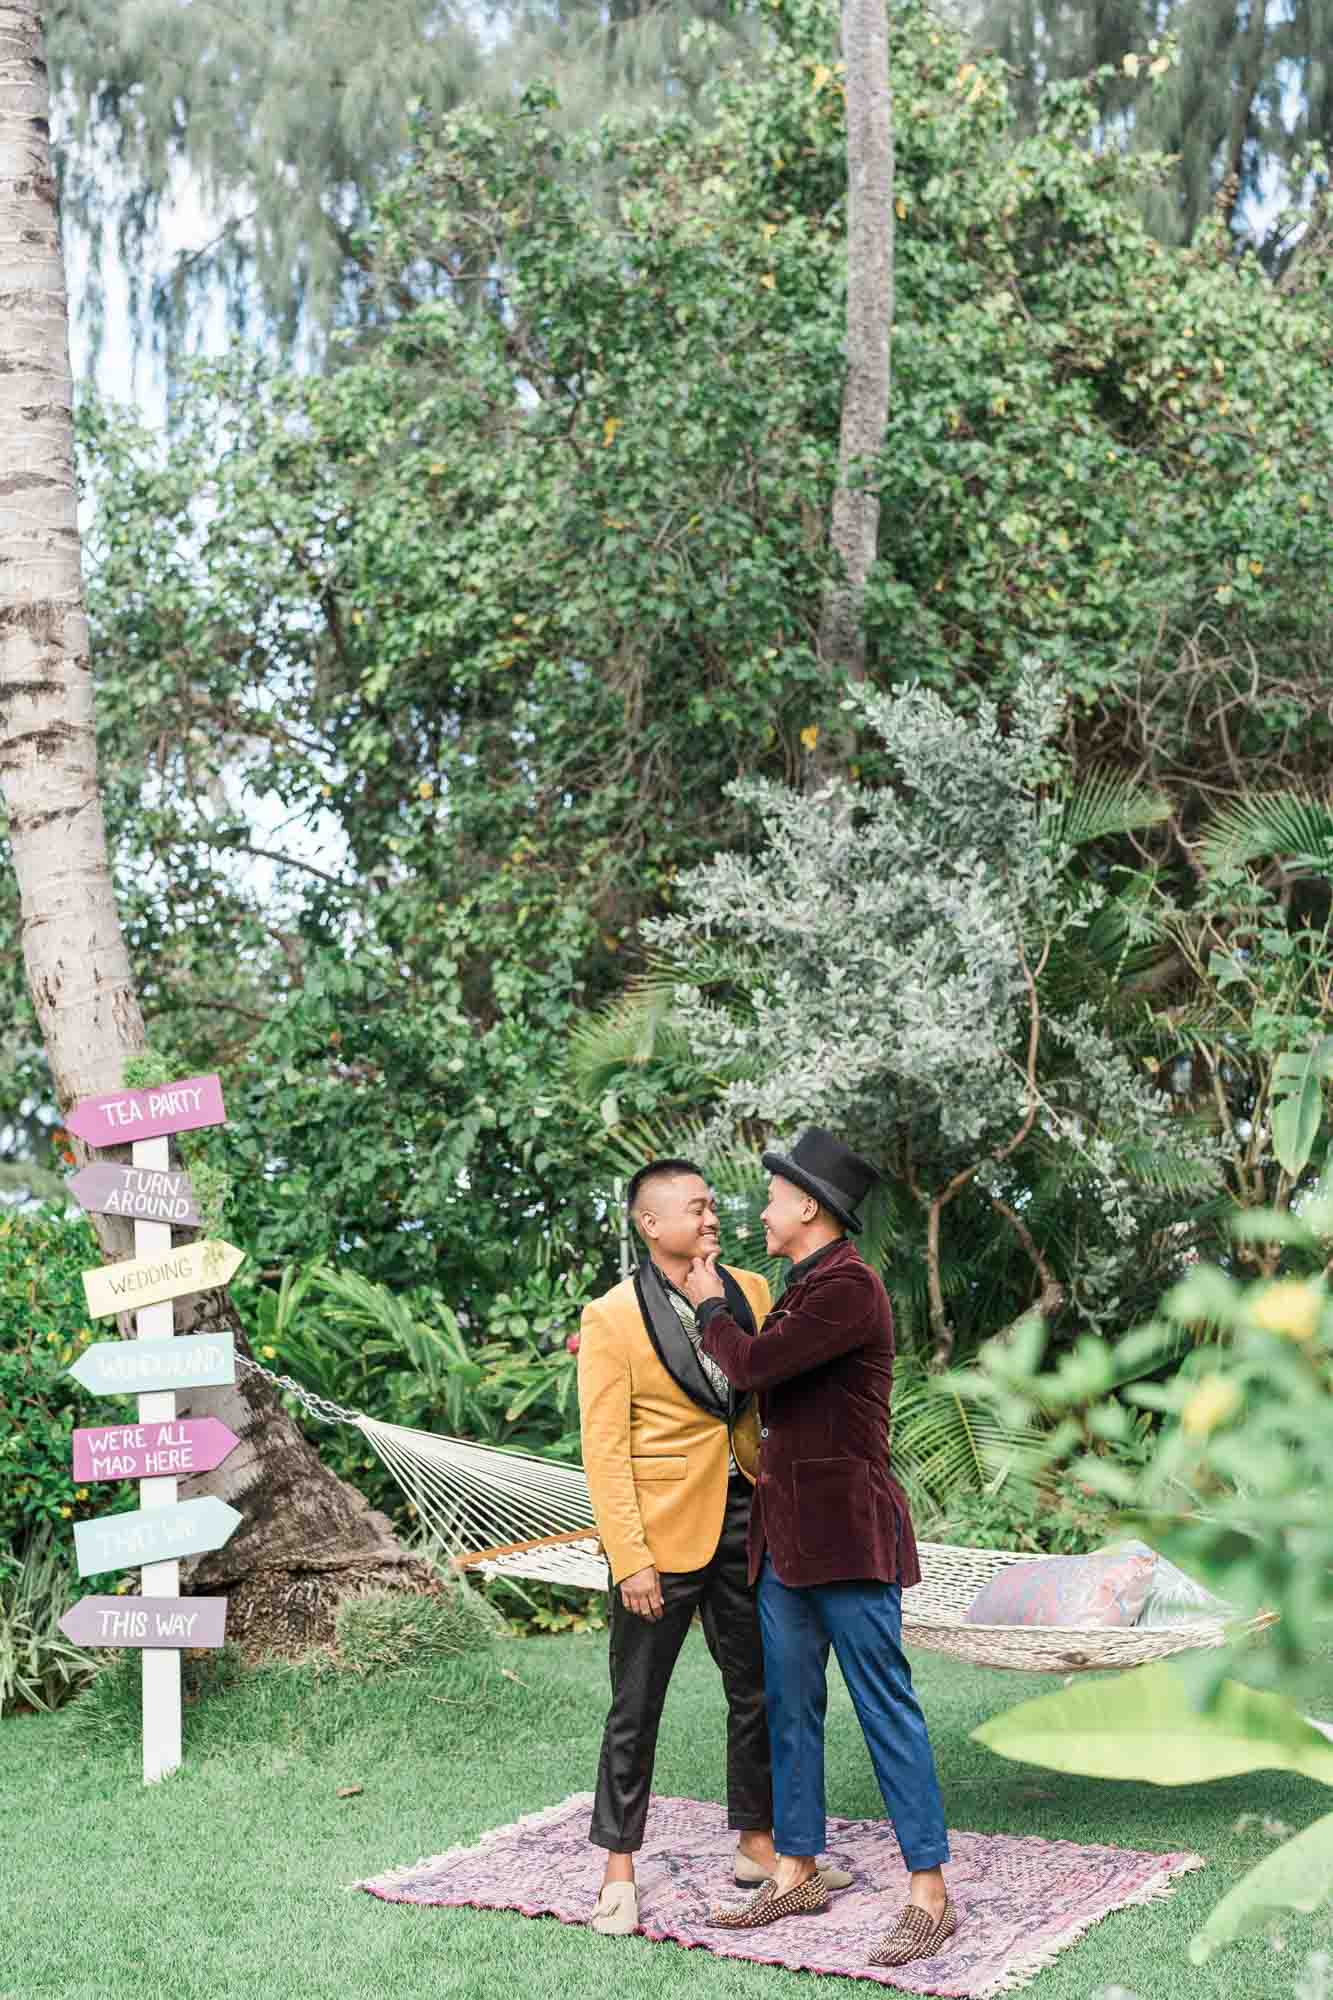 Wonderland-themed wedding inspiration in the gardens of O'ahu | Rae Marshall Photography | Featured on Equally Wed, the leading LGBTQ+ wedding magazine